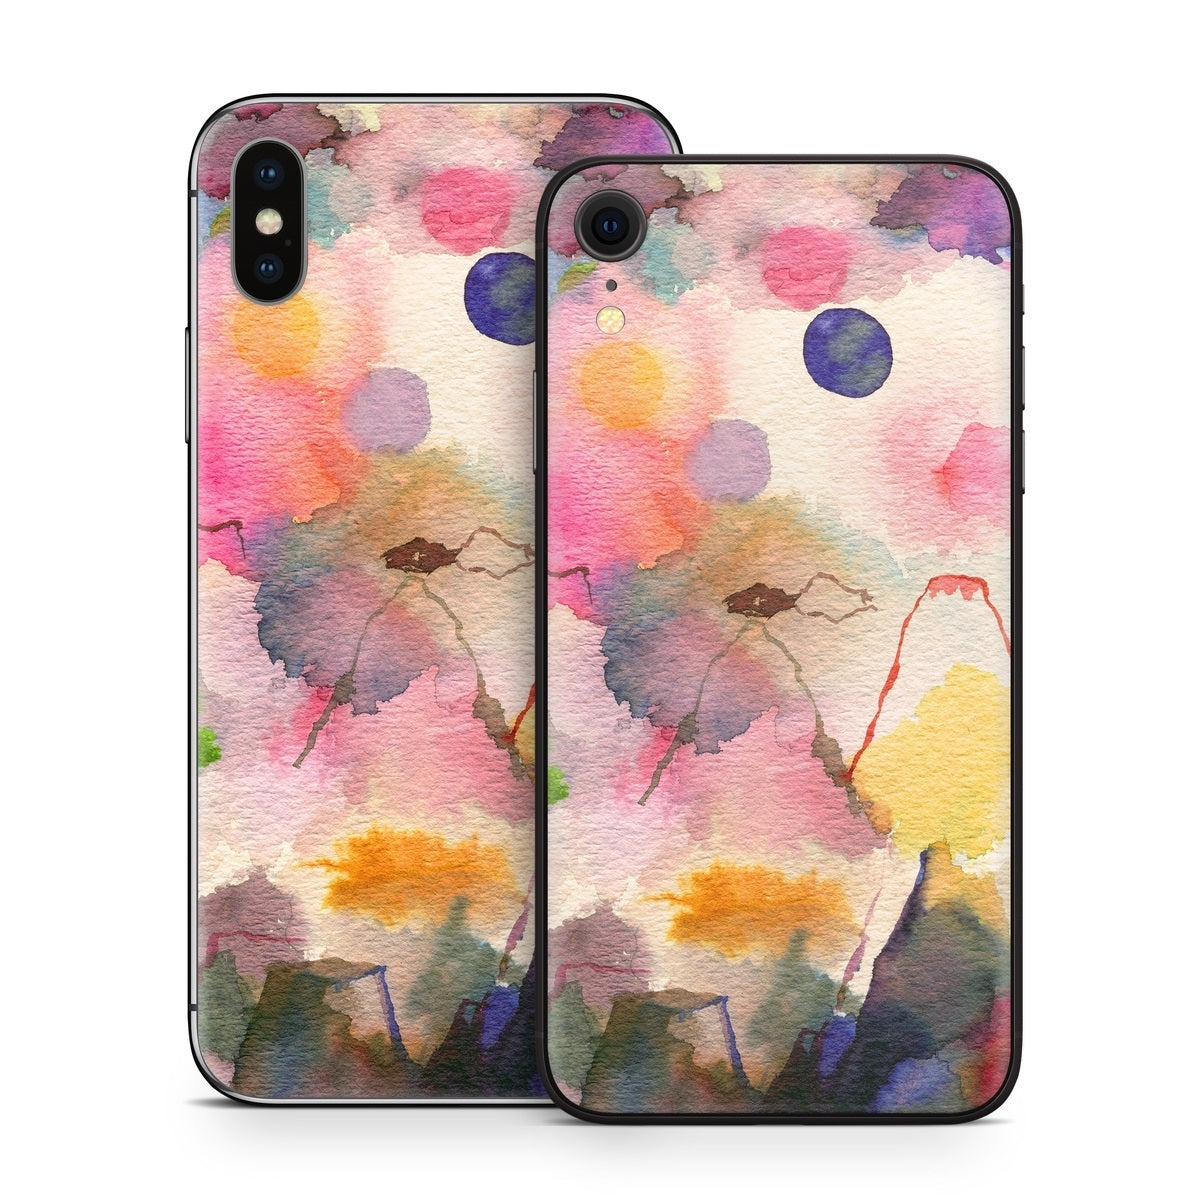 Watercolor Mountains - Apple iPhone X Skin